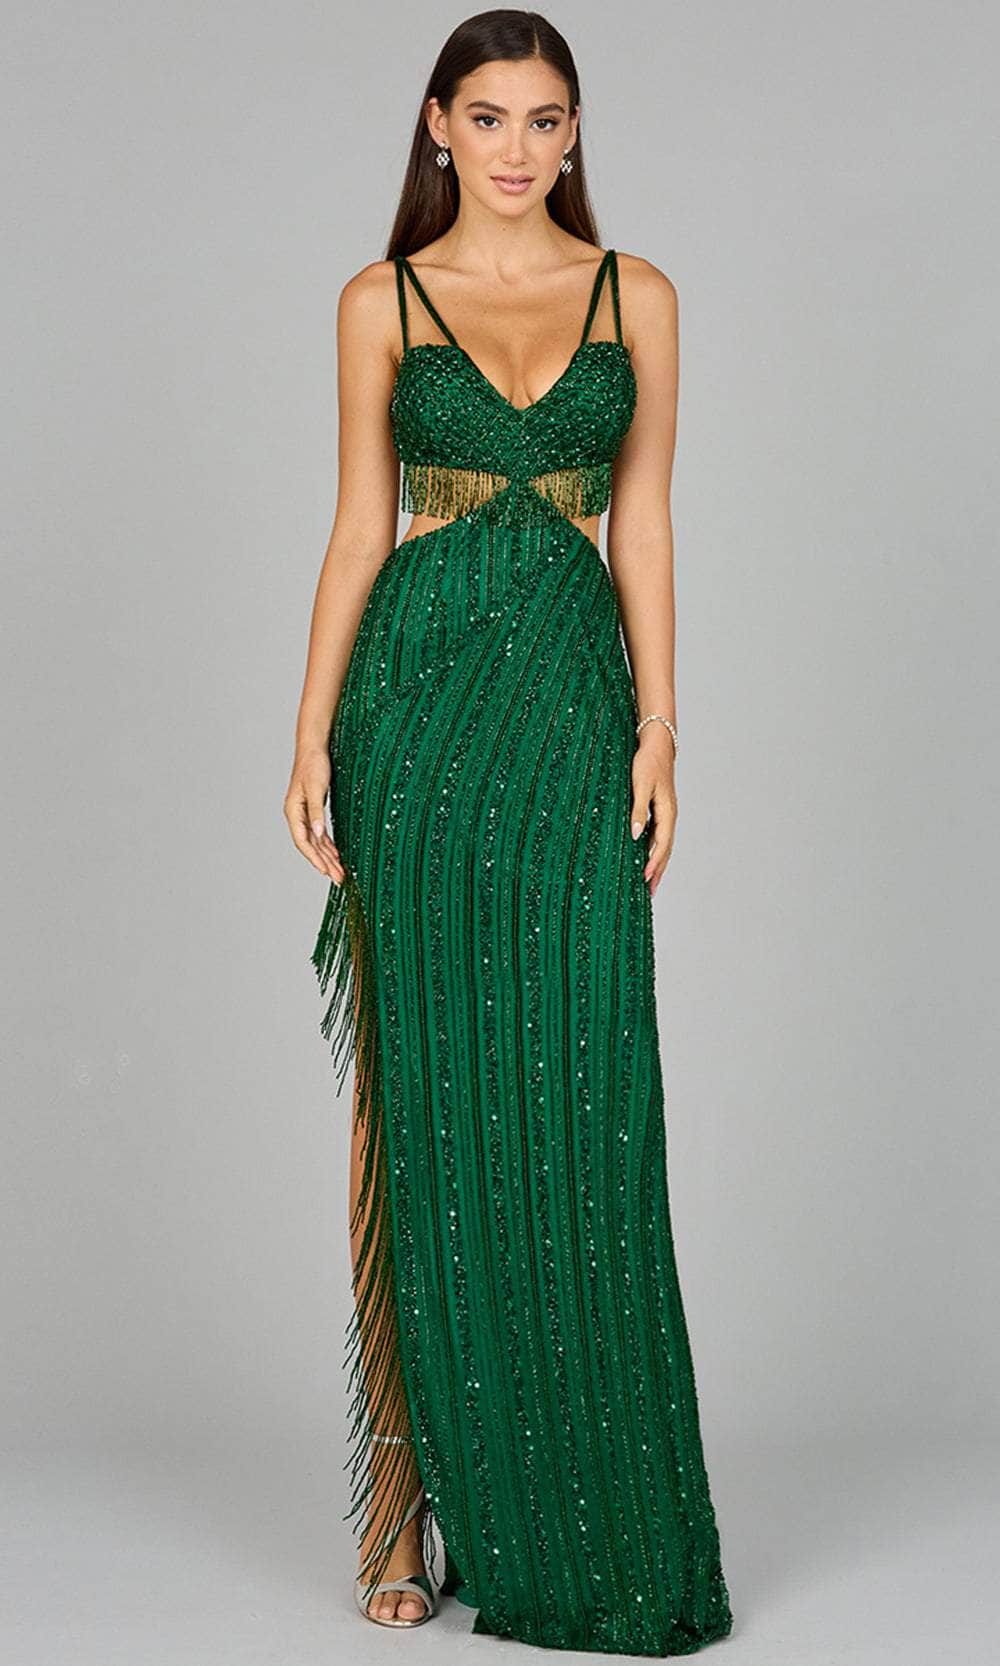 Lara Dresses 9957 - Strappy Back Cutout Prom Dress Special Occasion Dresses 0/ Emerald